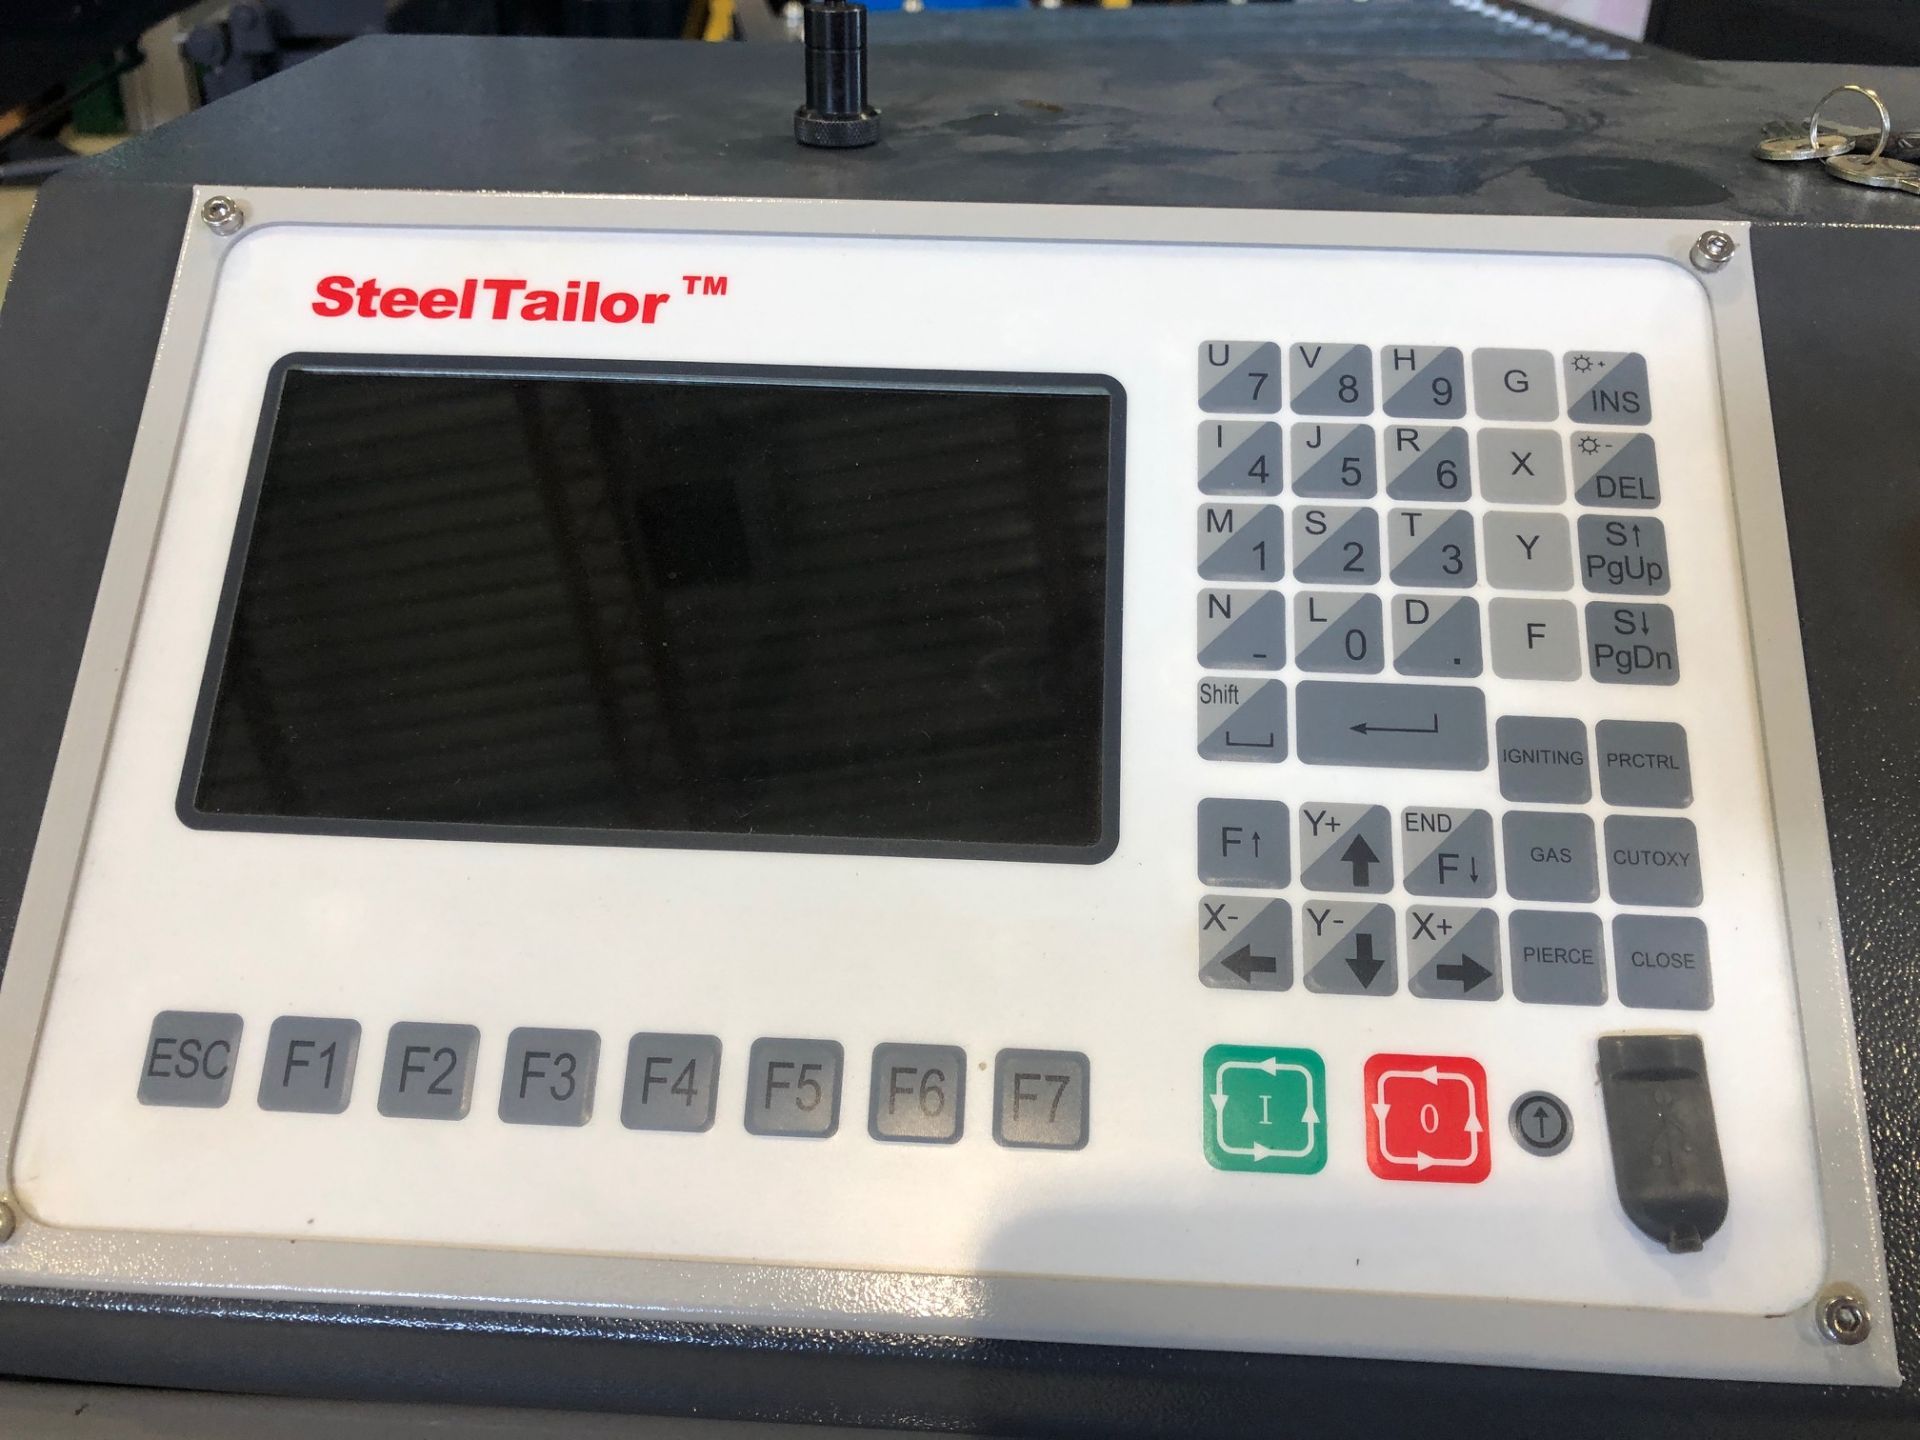 (NEW) STEEL TAYLOR CNC PLASMA TABLE, MODEL LEGEND B511, 5' X 10' (TORCH NOT INCLUDED) - Image 8 of 8